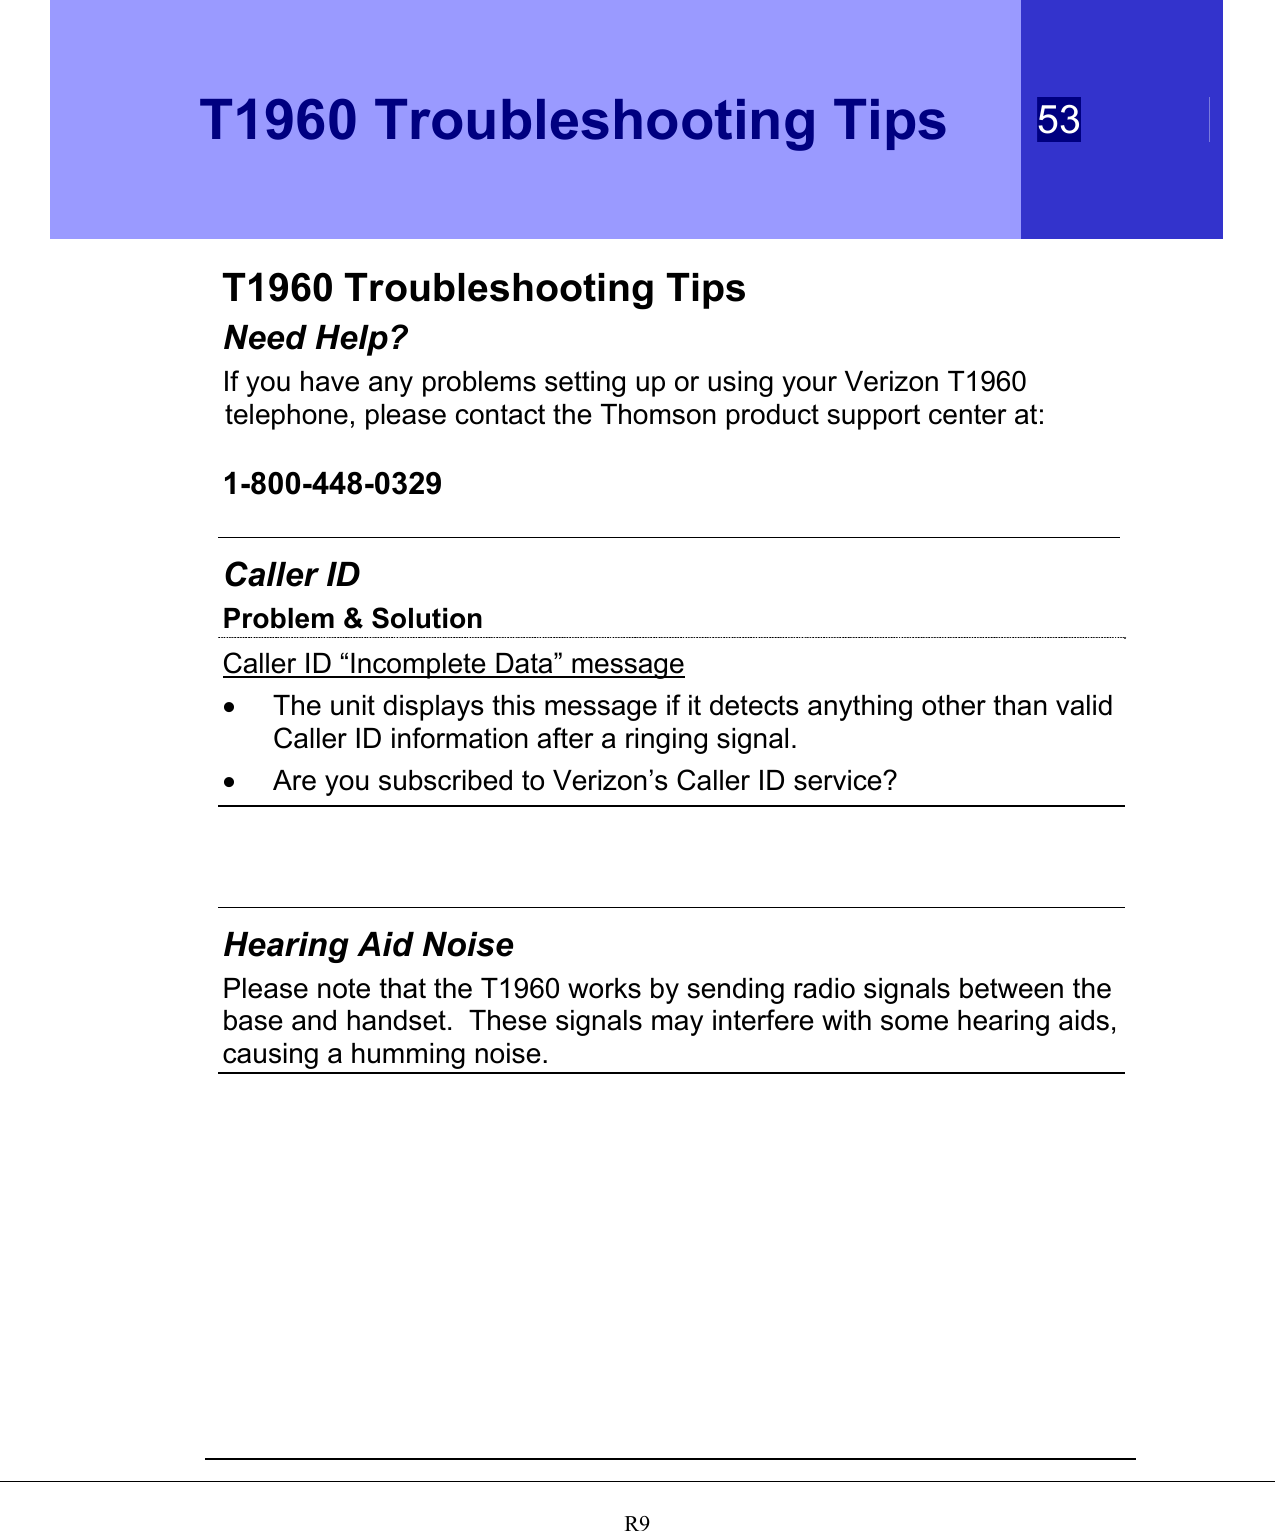   T1960 Troubleshooting Tips 53   R9T1960 Troubleshooting Tips Need Help? If you have any problems setting up or using your Verizon T1960 telephone, please contact the Thomson product support center at:  1-800-448-0329  Caller ID Problem &amp; Solution Caller ID “Incomplete Data” message •  The unit displays this message if it detects anything other than valid Caller ID information after a ringing signal. •  Are you subscribed to Verizon’s Caller ID service?    Hearing Aid Noise Please note that the T1960 works by sending radio signals between the base and handset.  These signals may interfere with some hearing aids, causing a humming noise.   